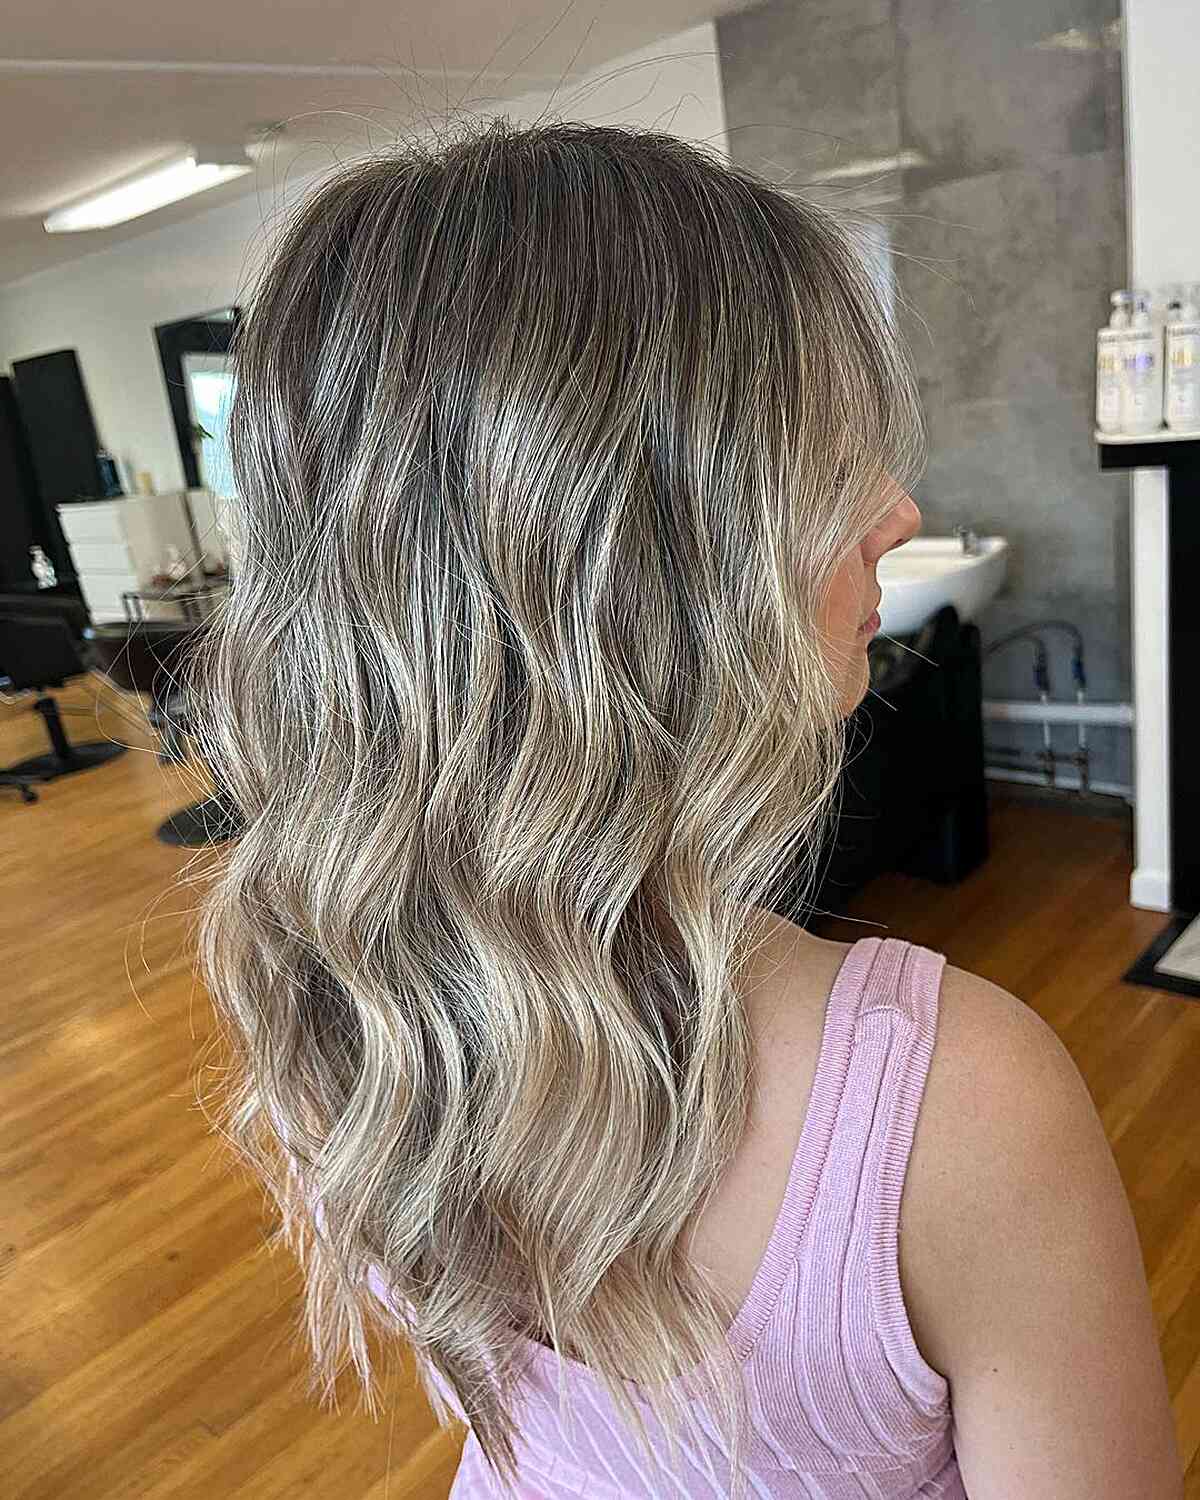 Dark Base with Ashy Dirty Blonde Balayage Tones for Layered Mid-Length Cut